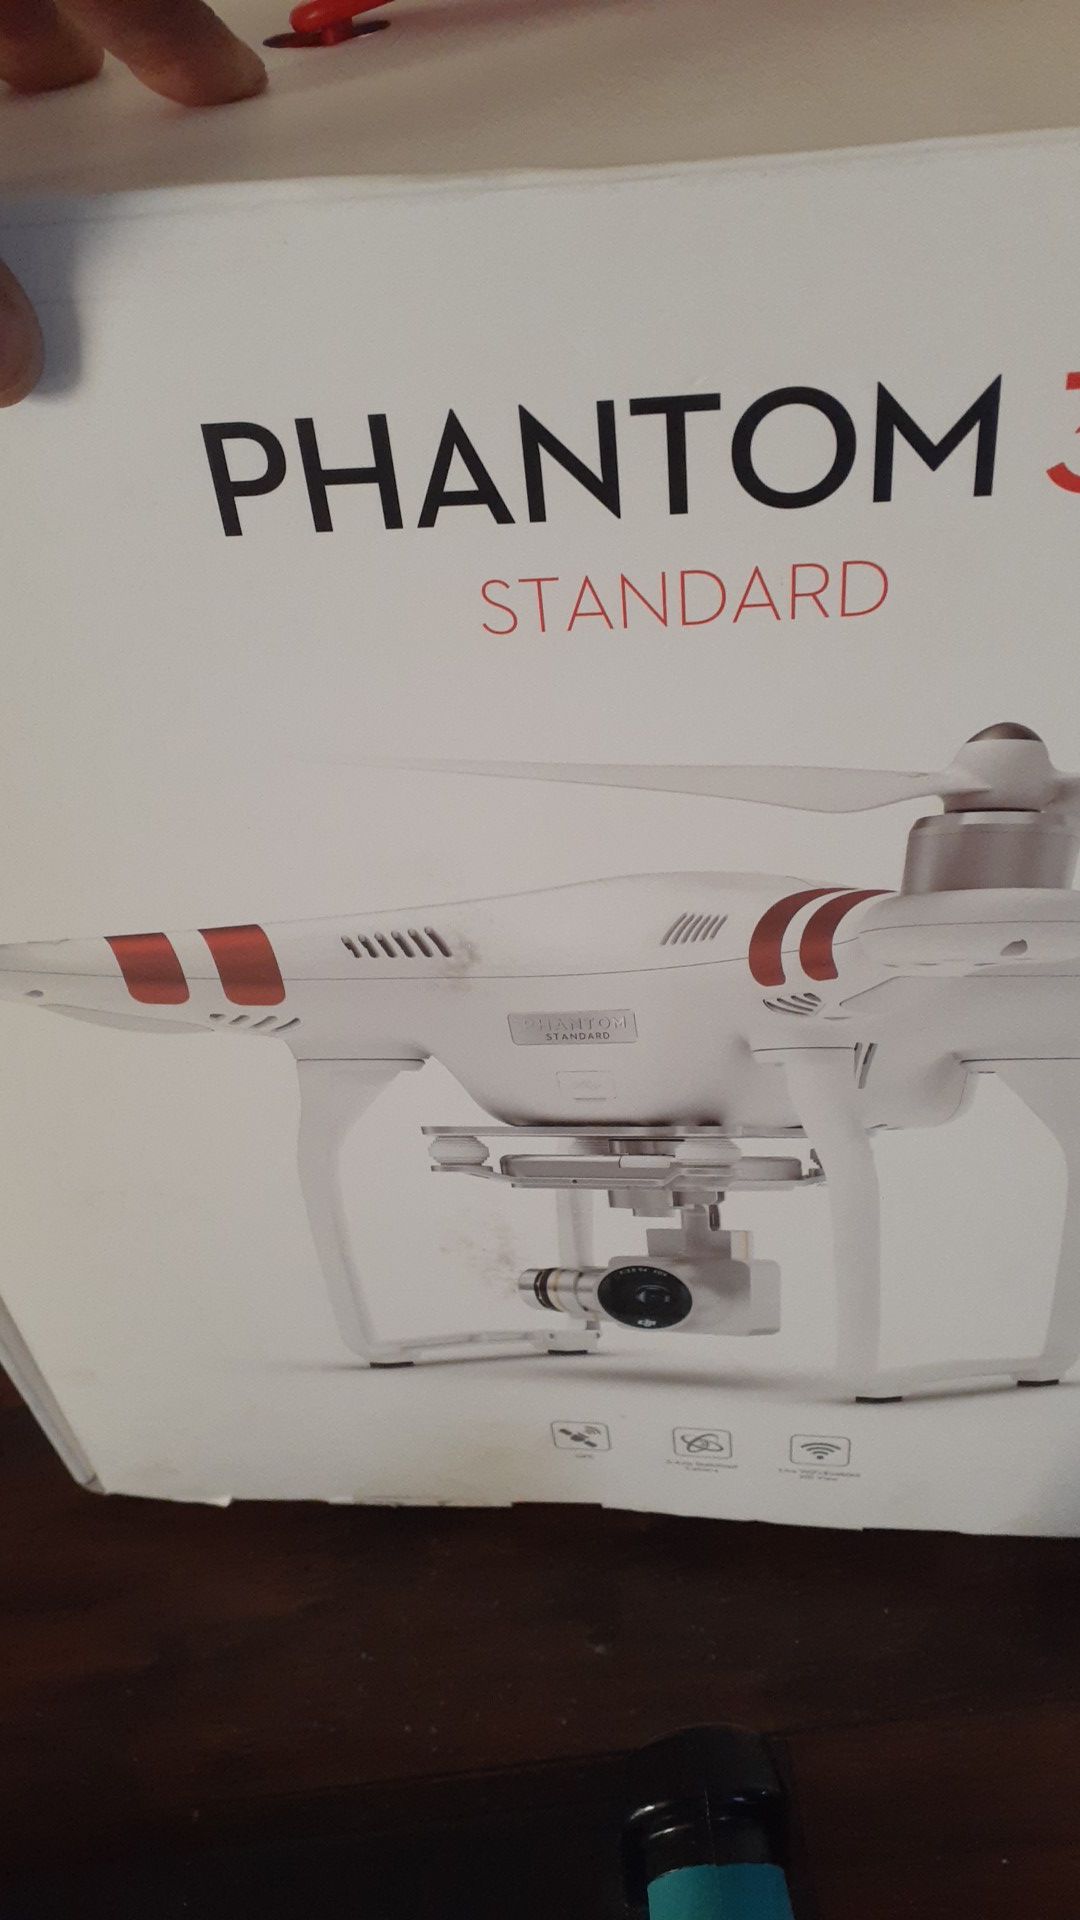 Phantom for sale great condition